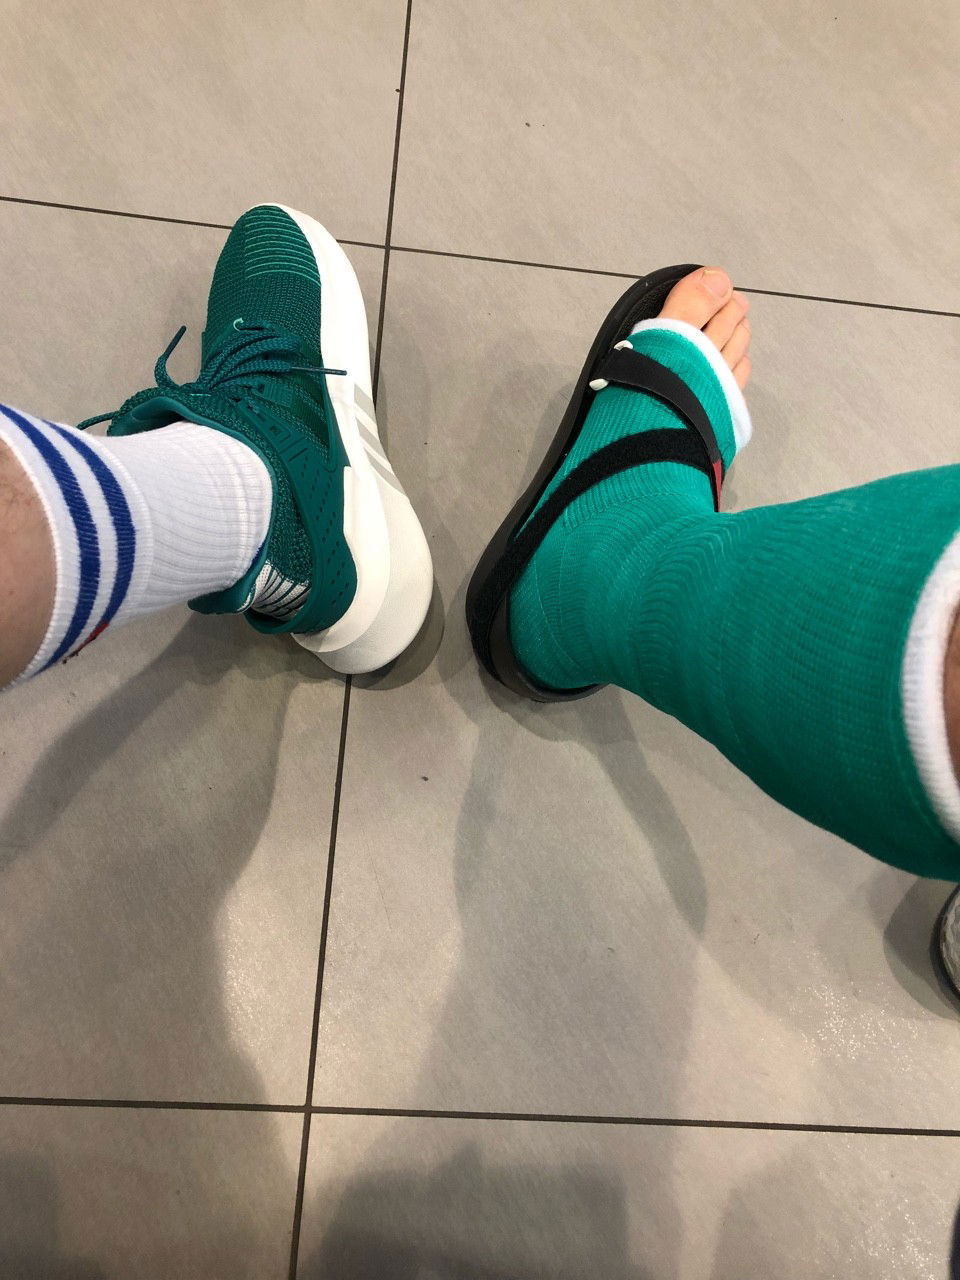 Watch the Photo by ampstef with the username @ampstef, posted on June 29, 2018 and the text says 'castmande:

Shell i buy some new #sneakers ? #brokenleg #brokenfoot #brokenankle #gaysneakers #gayfetish'